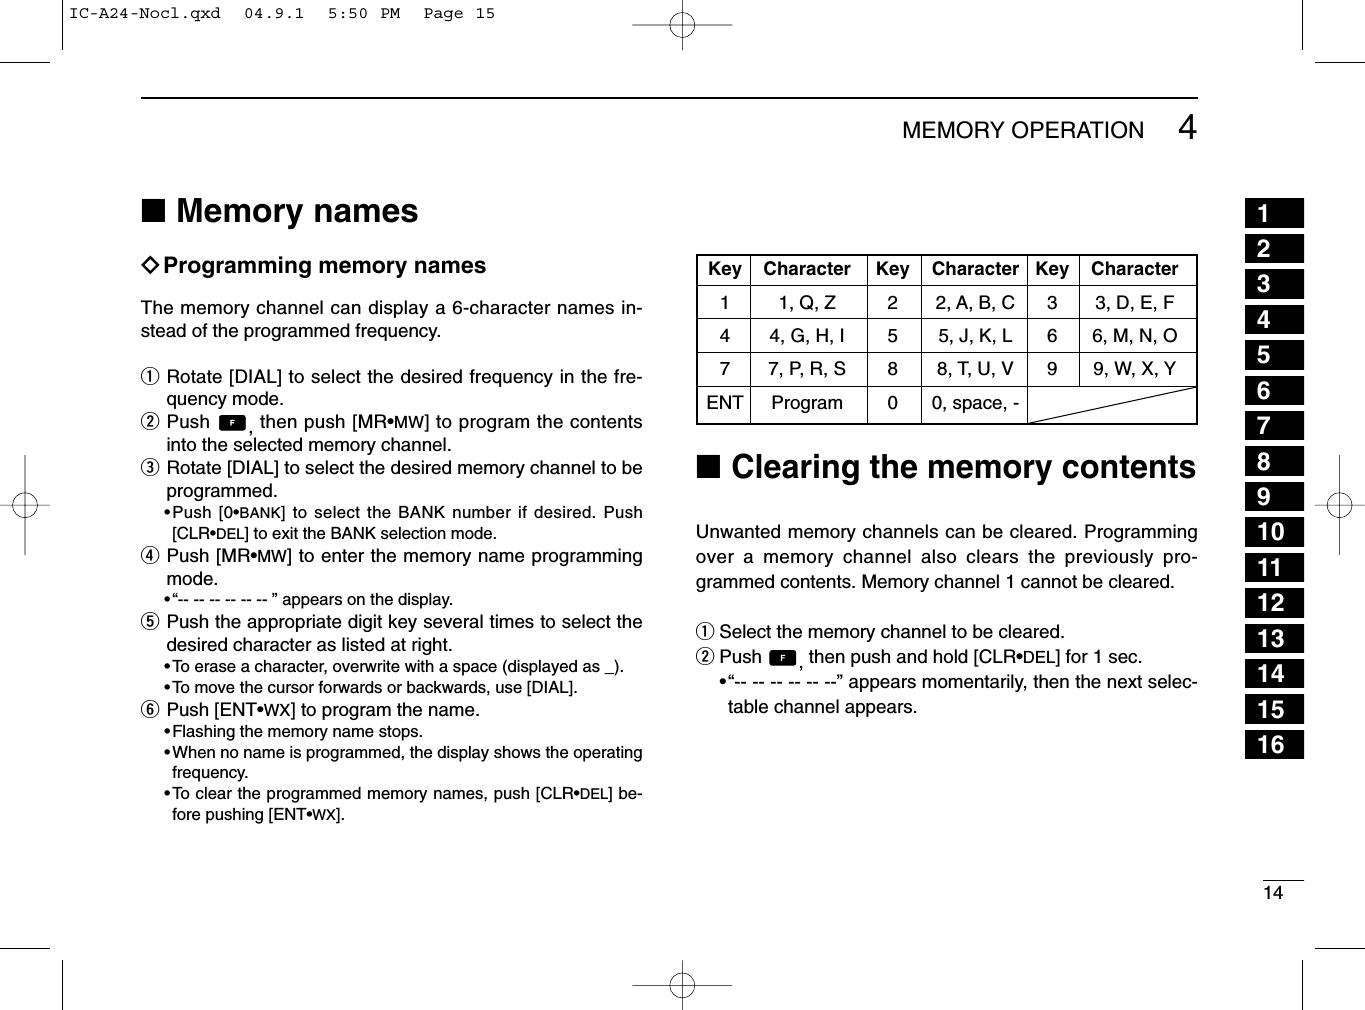 144MEMORY OPERATION■Memory namesïProgramming memory namesThe memory channel can display a 6-character names in-stead of the programmed frequency.qRotate [DIAL] to select the desired frequency in the fre-quency mode. wPush  ,then push [MR•MW] to program the contentsinto the selected memory channel.eRotate [DIAL] to select the desired memory channel to beprogrammed.•Push [0•BANK] to select the BANK number if desired. Push[CLR•DEL] to exit the BANK selection mode.rPush [MR•MW] to enter the memory name programmingmode.•“-- -- -- -- -- -- ” appears on the display.tPush the appropriate digit key several times to select thedesired character as listed at right.•To erase a character, overwrite with a space (displayed as _).•To move the cursor forwards or backwards, use [DIAL].yPush [ENT•WX] to program the name.•Flashing the memory name stops.•When no name is programmed, the display shows the operatingfrequency.•To clear the programmed memory names, push [CLR•DEL] be-fore pushing [ENT•WX].■Clearing the memory contentsUnwanted memory channels can be cleared. Programmingover a memory channel also clears the previously pro-grammed contents. Memory channel 1 cannot be cleared.qSelect the memory channel to be cleared.wPush , then push and hold [CLR•DEL] for 1 sec.•“-- -- -- -- -- --” appears momentarily, then the next selec-table channel appears.Key Character Key Character Key Character1 1, Q, Z 2 2, A, B, C 3 3, D, E, F4 4, G, H, I 5 5, J, K, L 6 6, M, N, O7 7, P, R, S 8 8, T, U, V 9 9, W, X, YENT Program 0 0, space, -12345678910111213141516IC-A24-Nocl.qxd  04.9.1  5:50 PM  Page 15